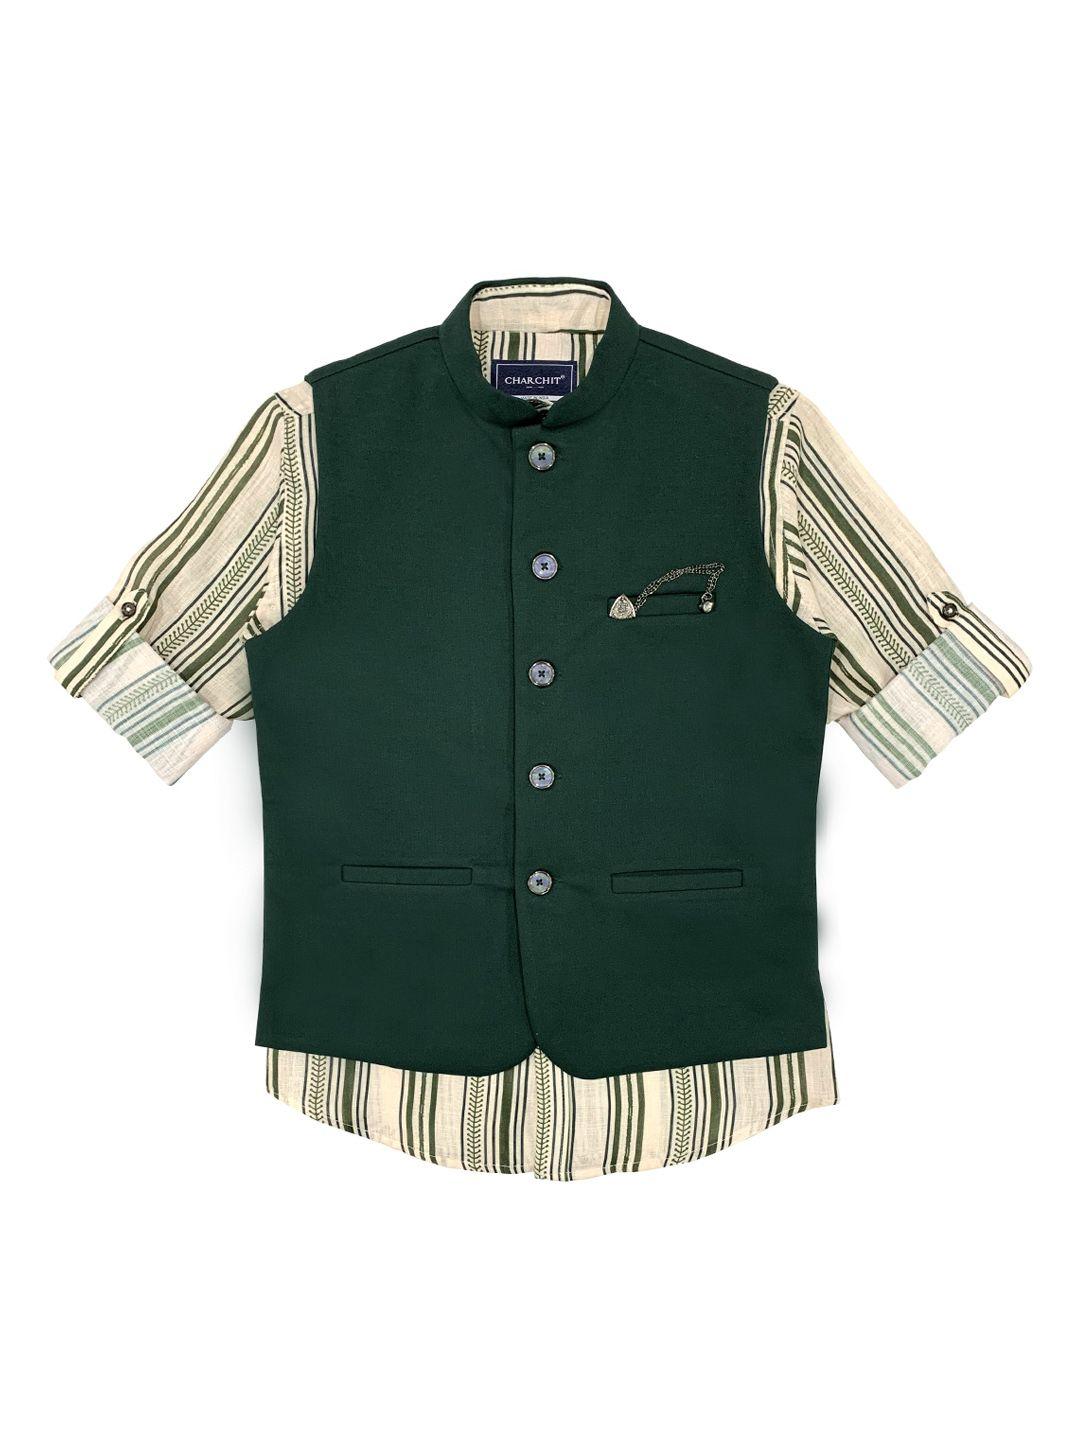 charchit boys green solid nehru jacket with shirt